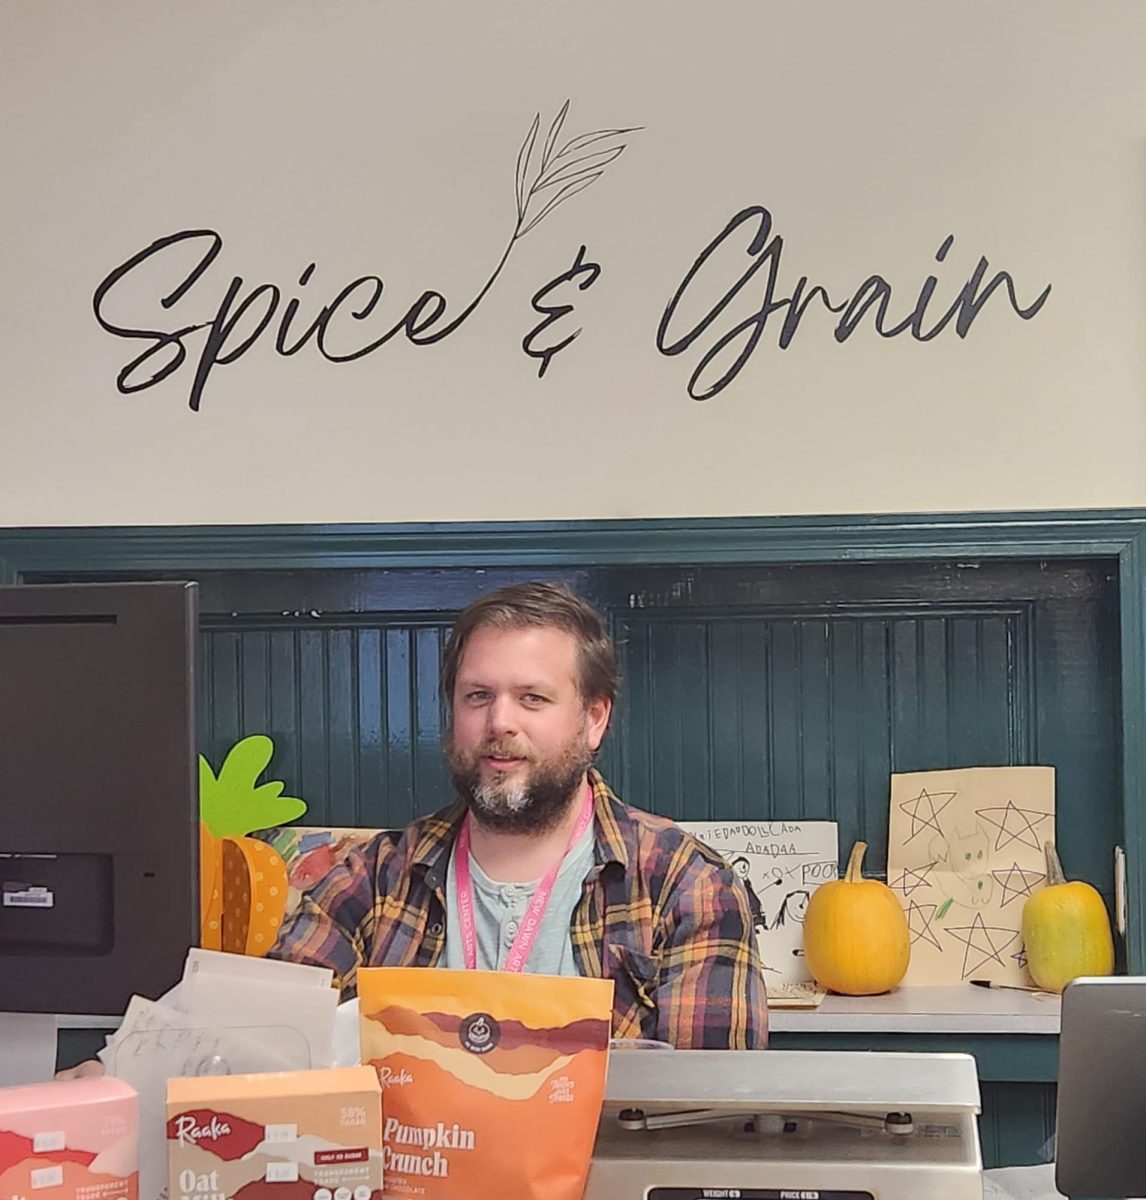 David Abbott, owner of Spice and Grain